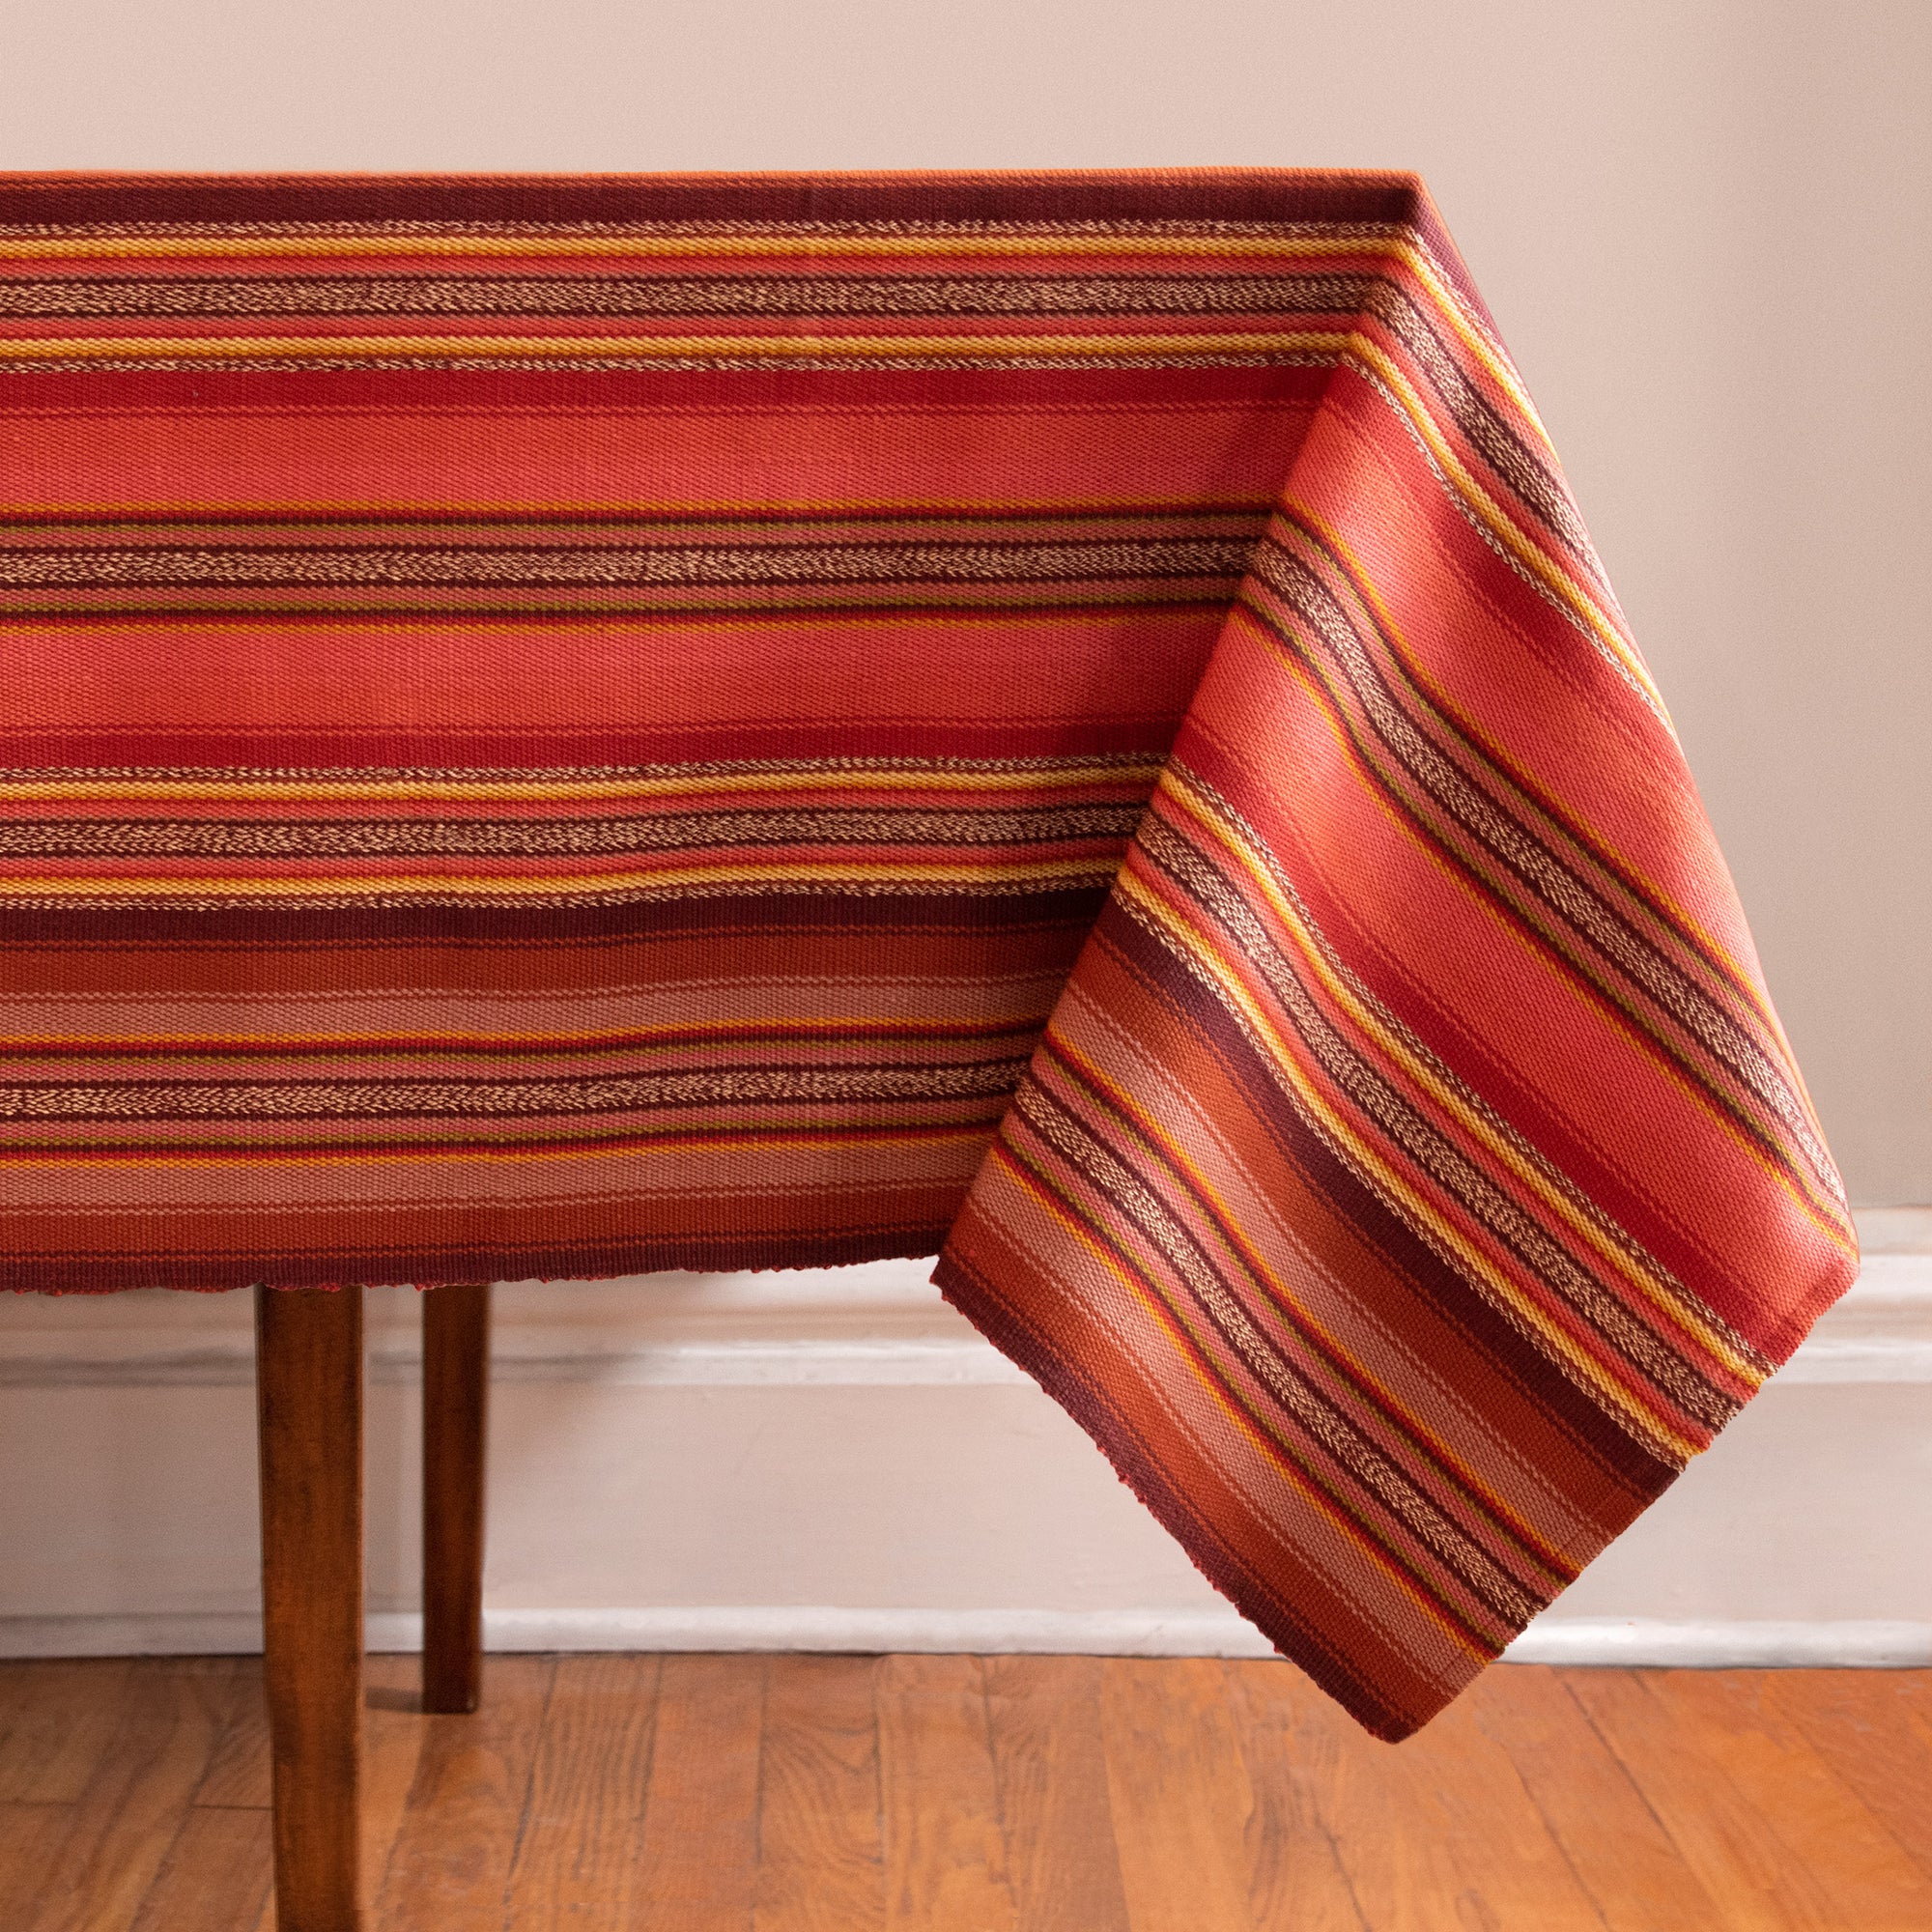 Striped Handwoven tablecloth in oranges and browns